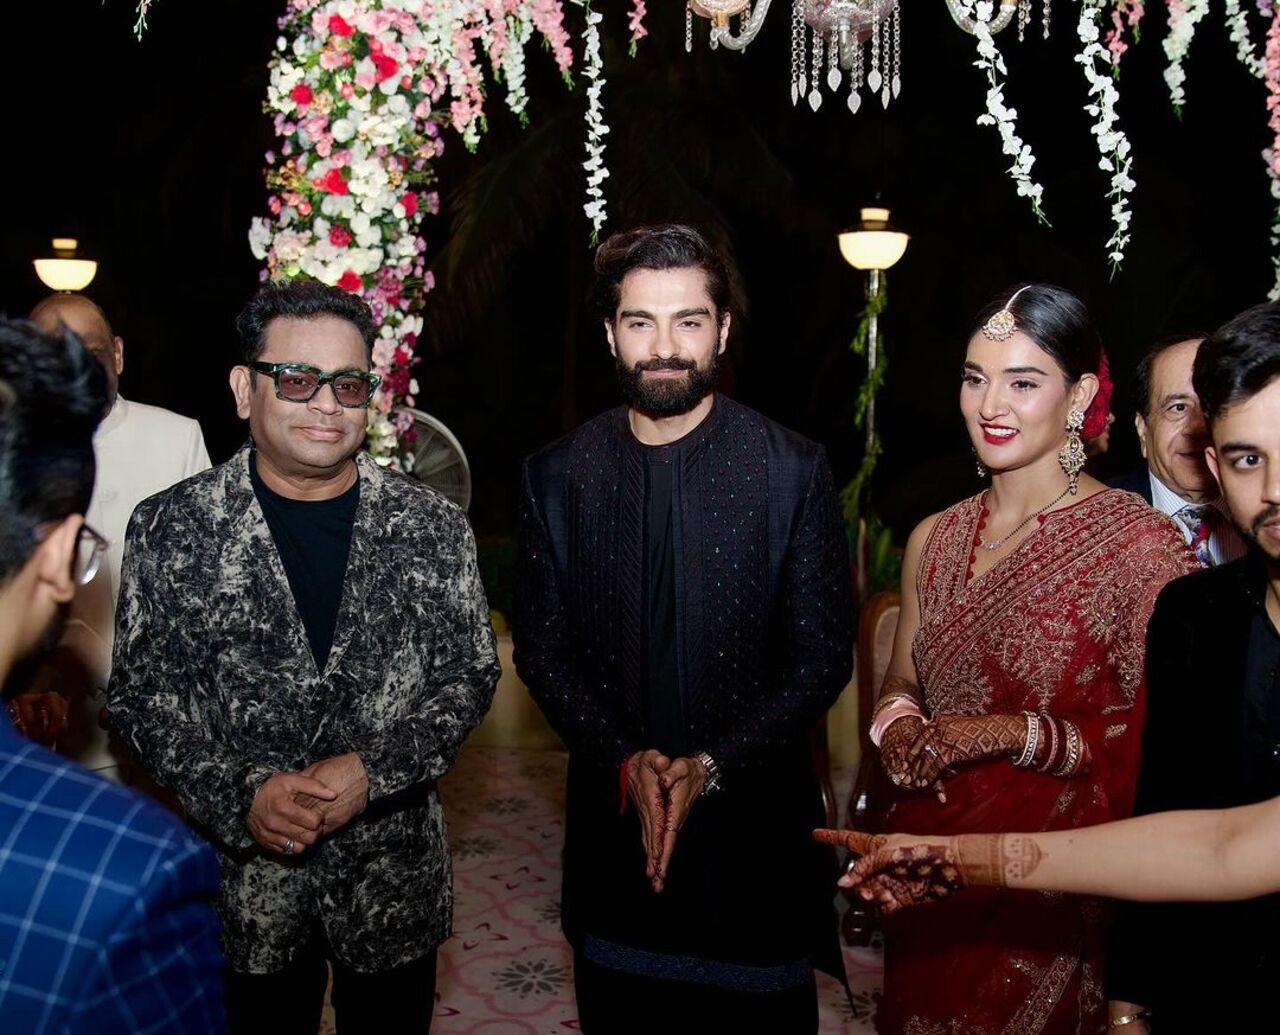 Ace music composer AR Rahman was also at the wedding to bless the newlyweds